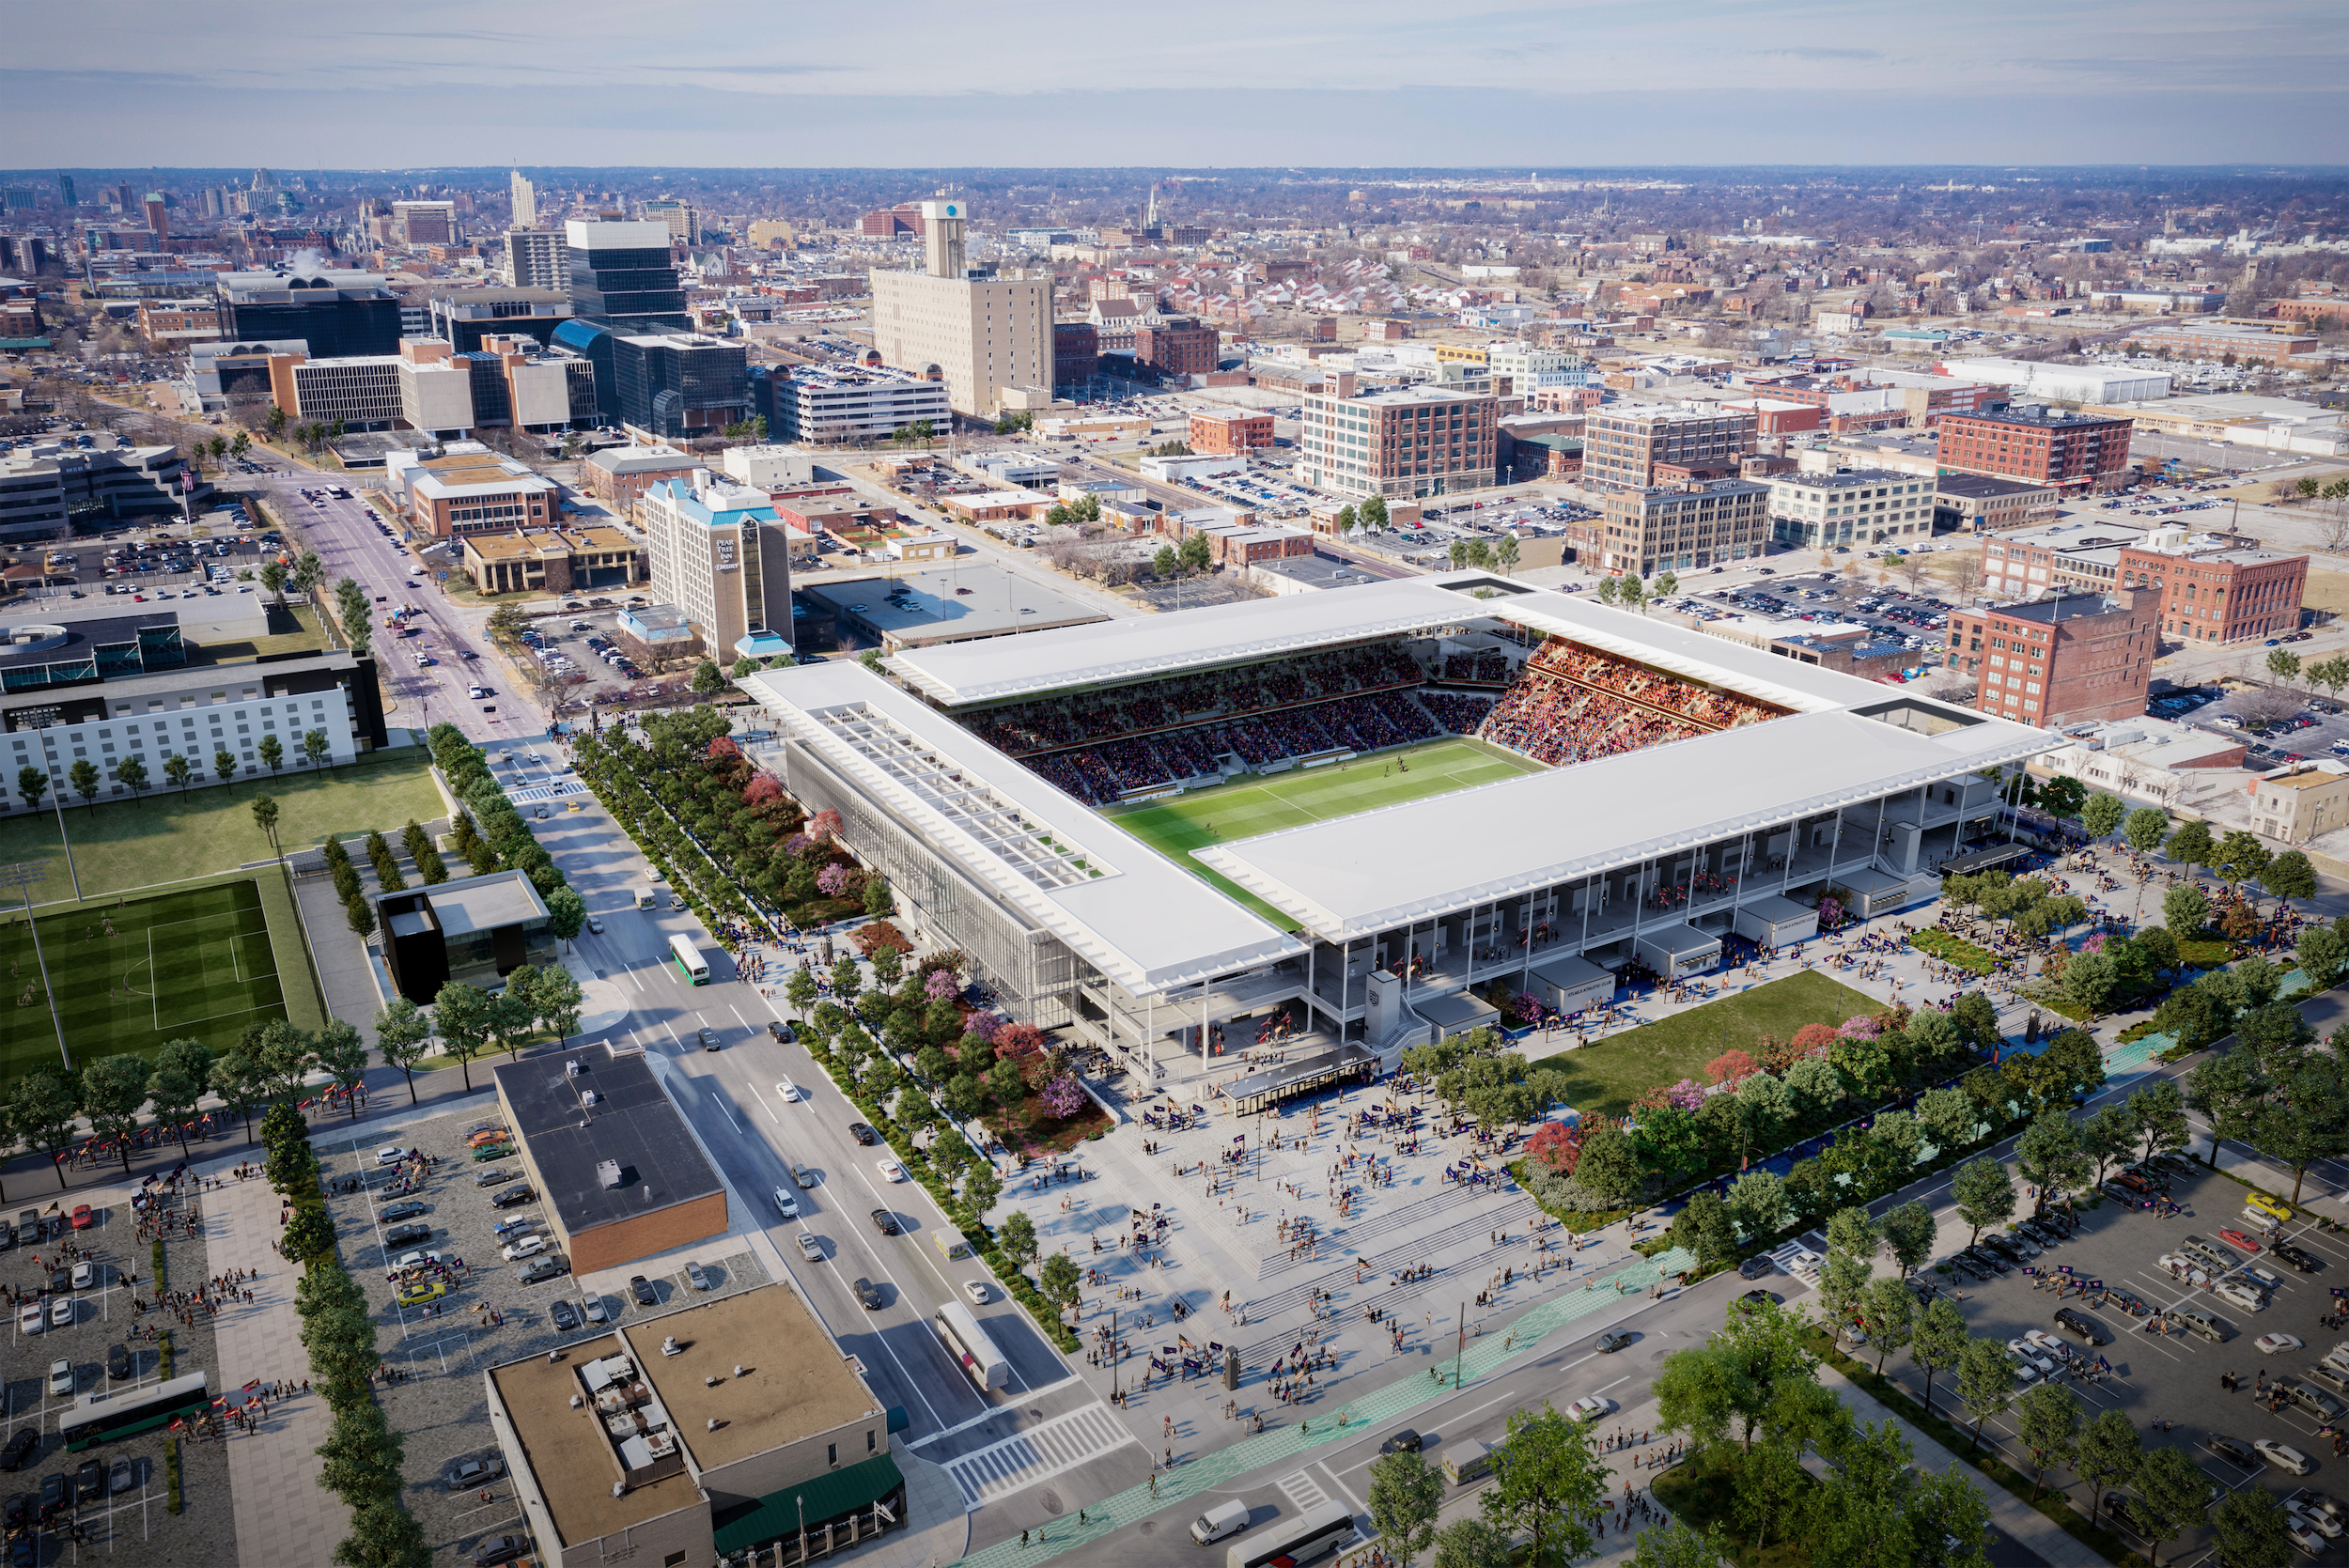 MLS expansion team St. Louis City SC opens Saturday in Austin, Texas